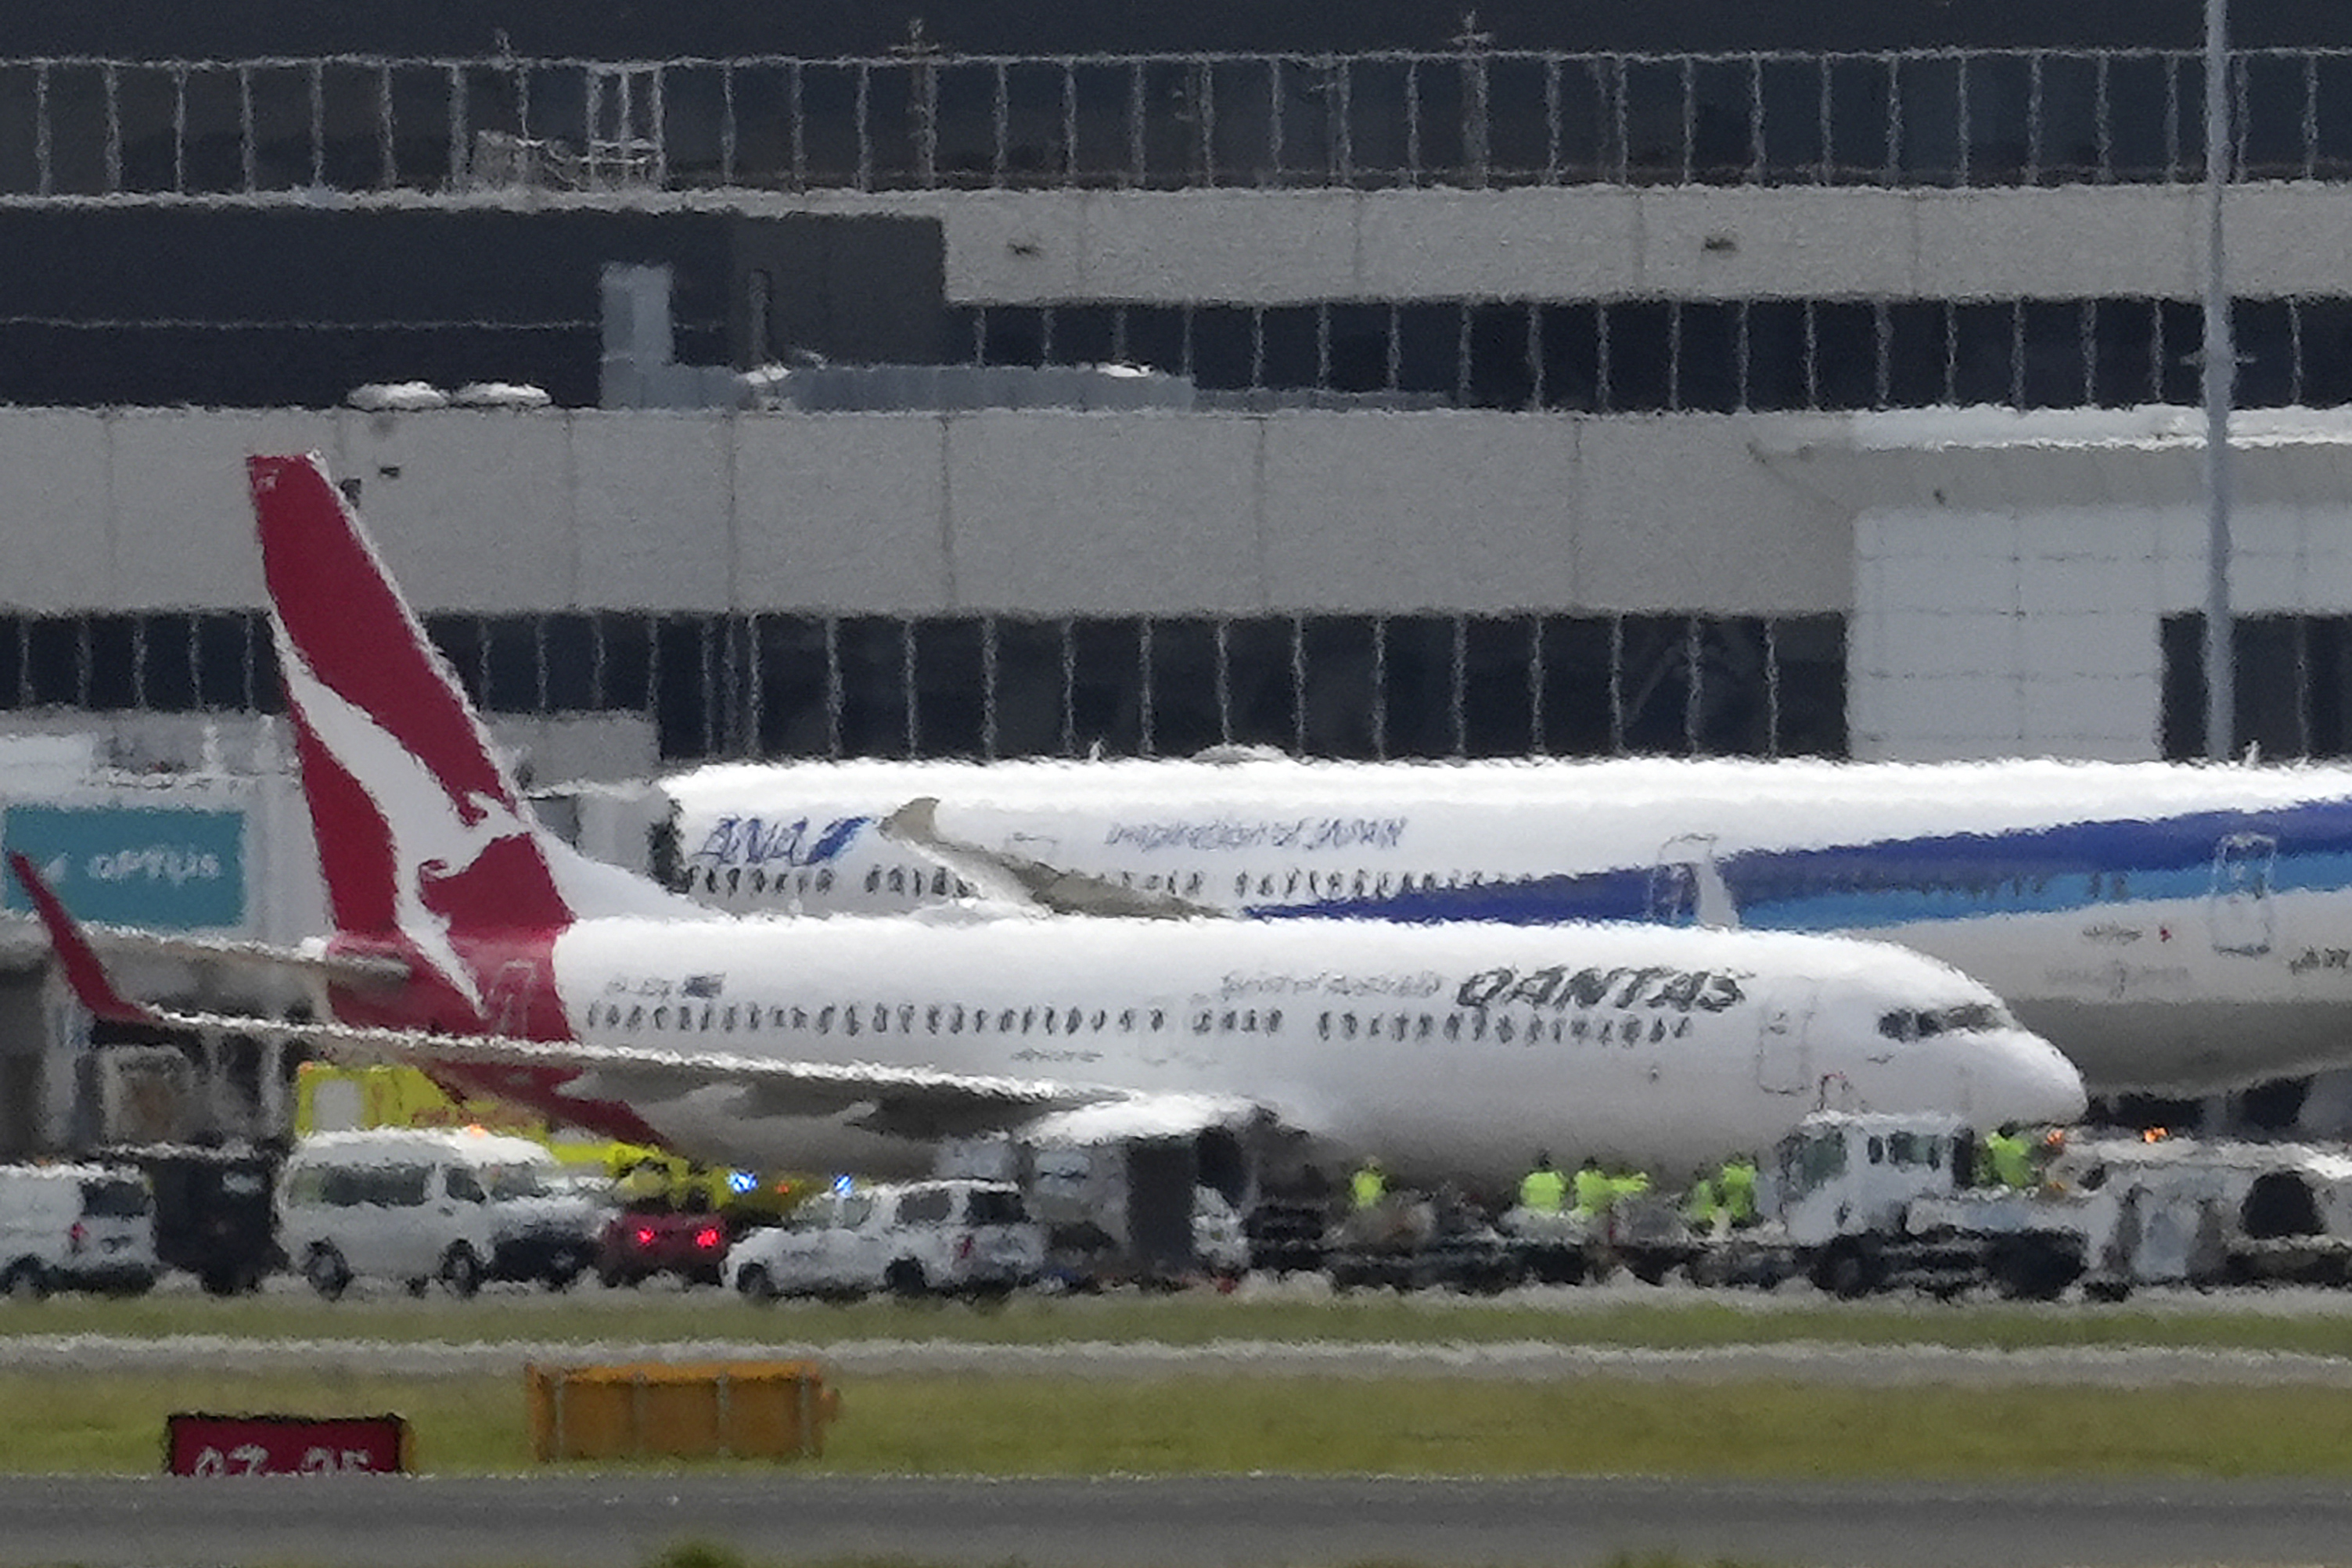 Plane Lands Safely in Australia After Going Into Mayday Call Over Pacific